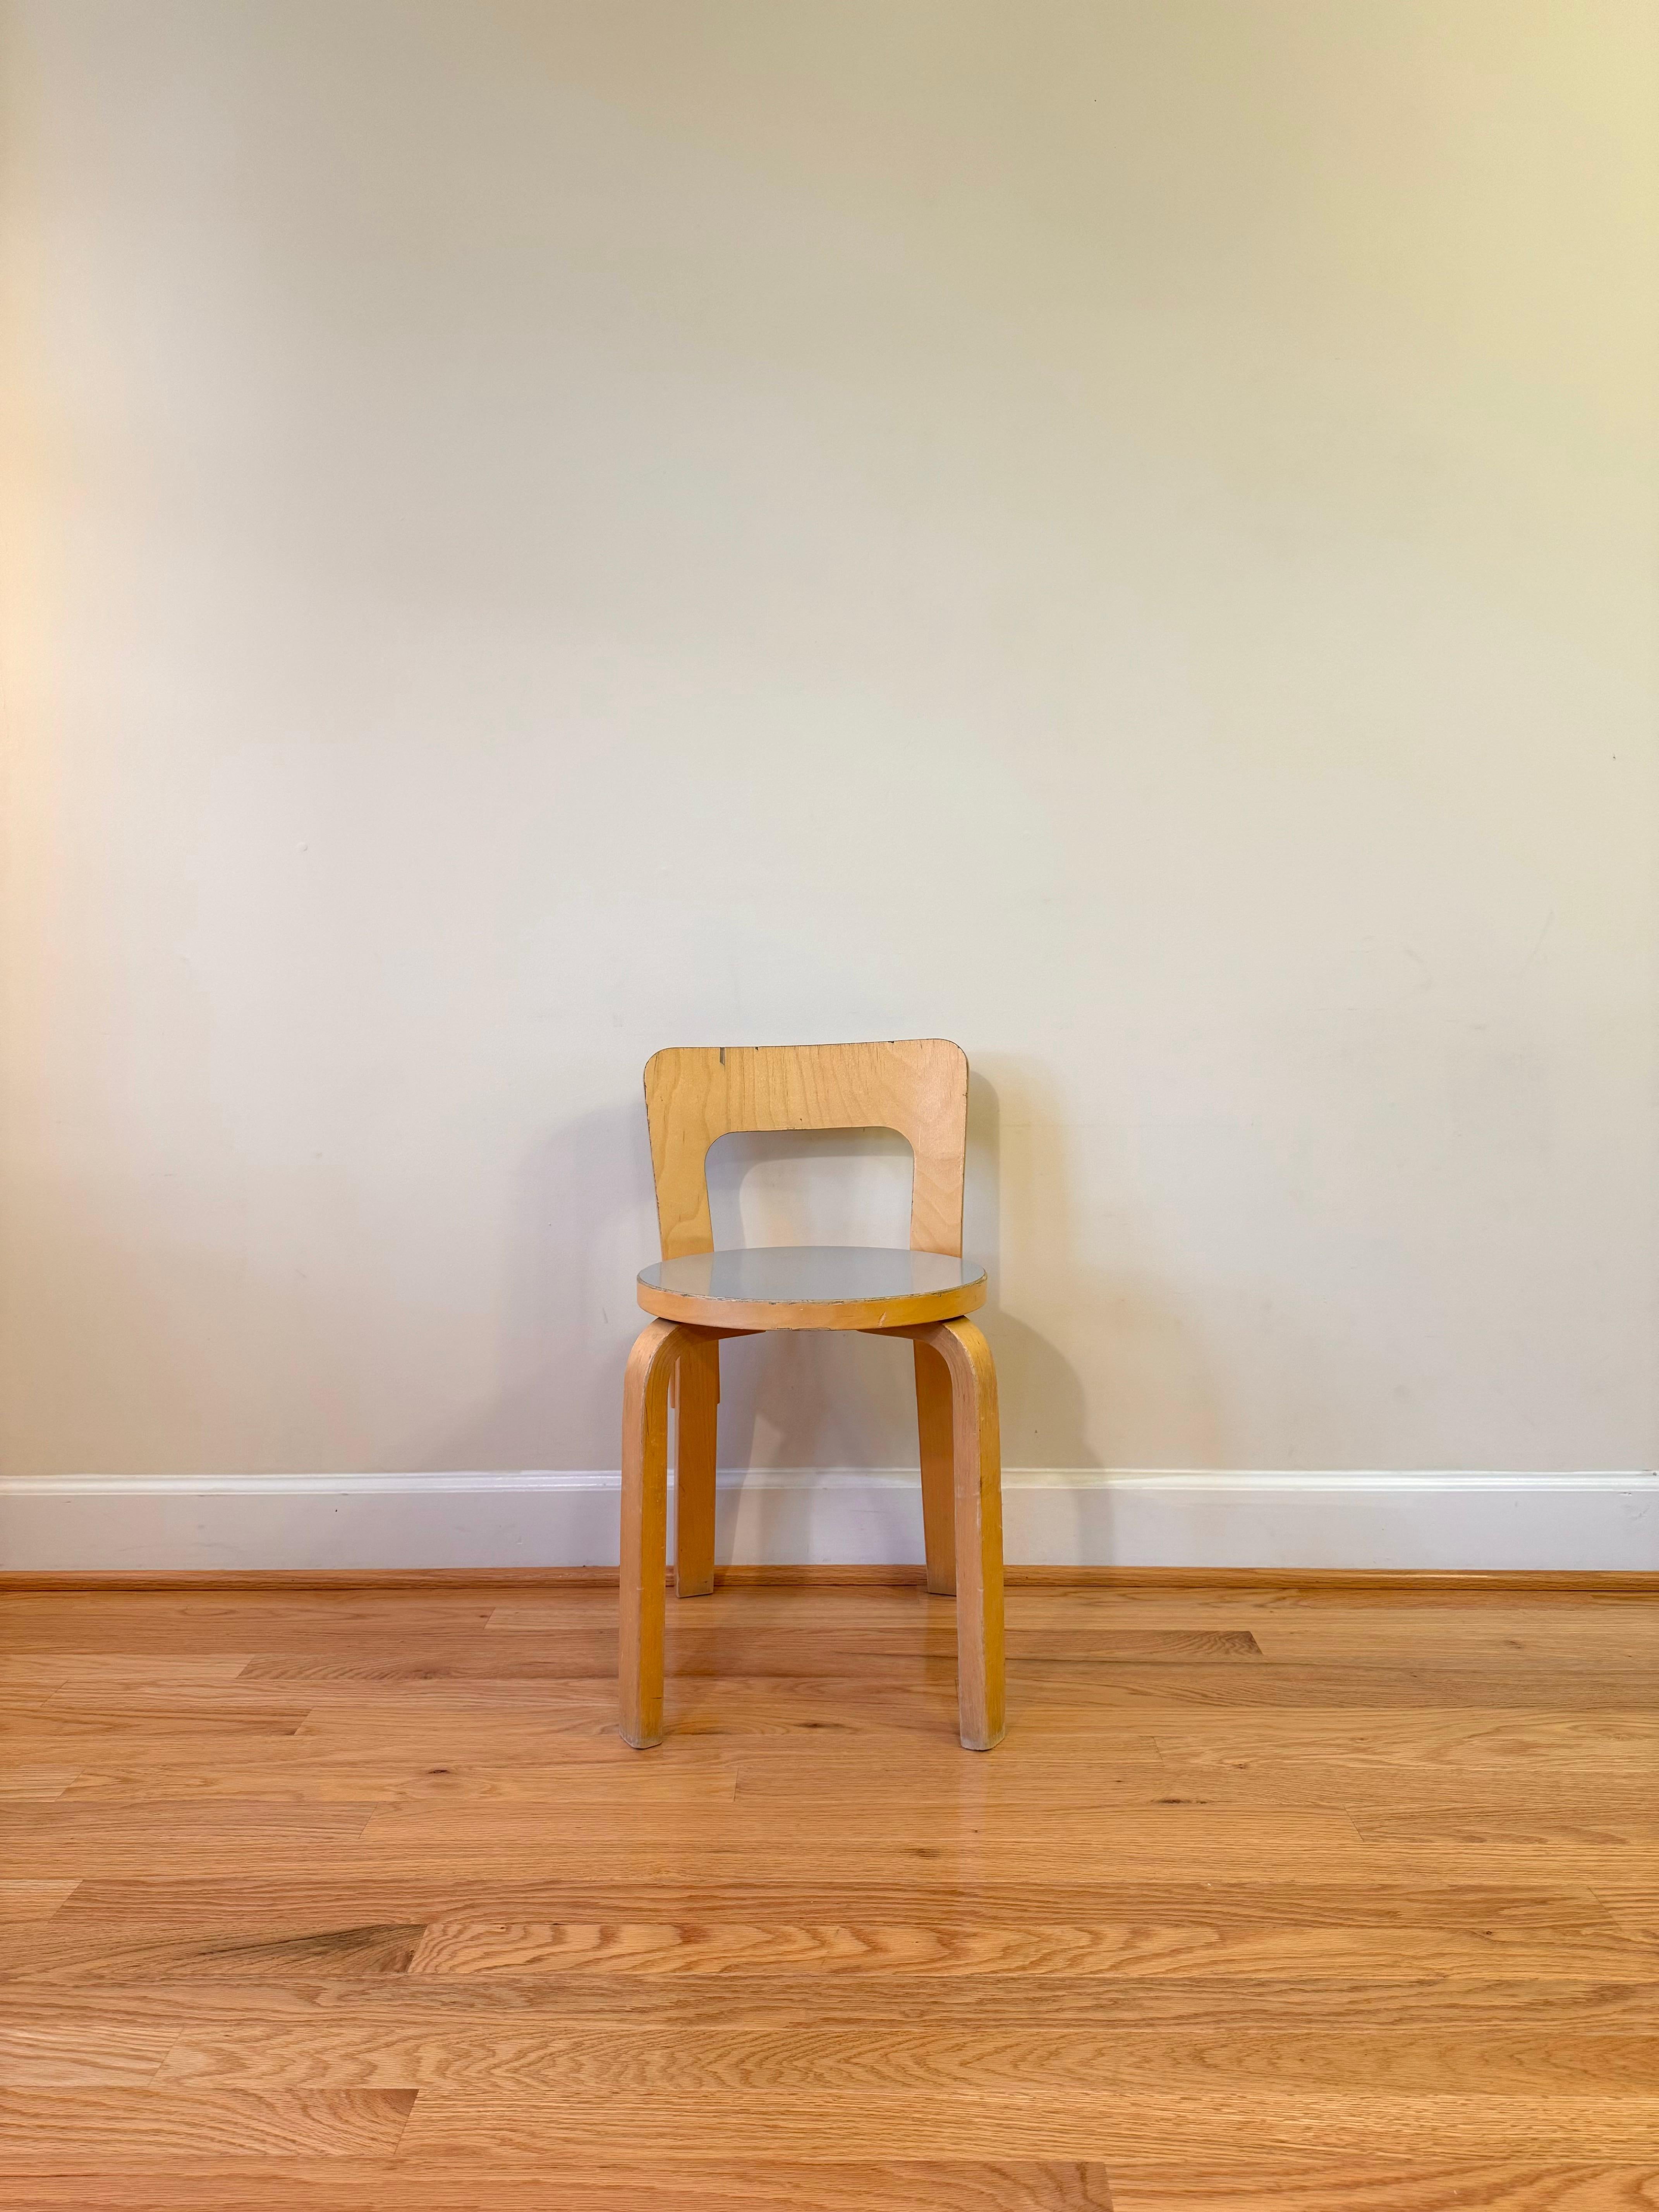 Clean lines and a simple structure define the design of Chair 65. 

A low, rectangular backrest is formed from a single piece of birch plywood and has a slight curve that forms naturally to the back, offering comfort and support. 

The height of the